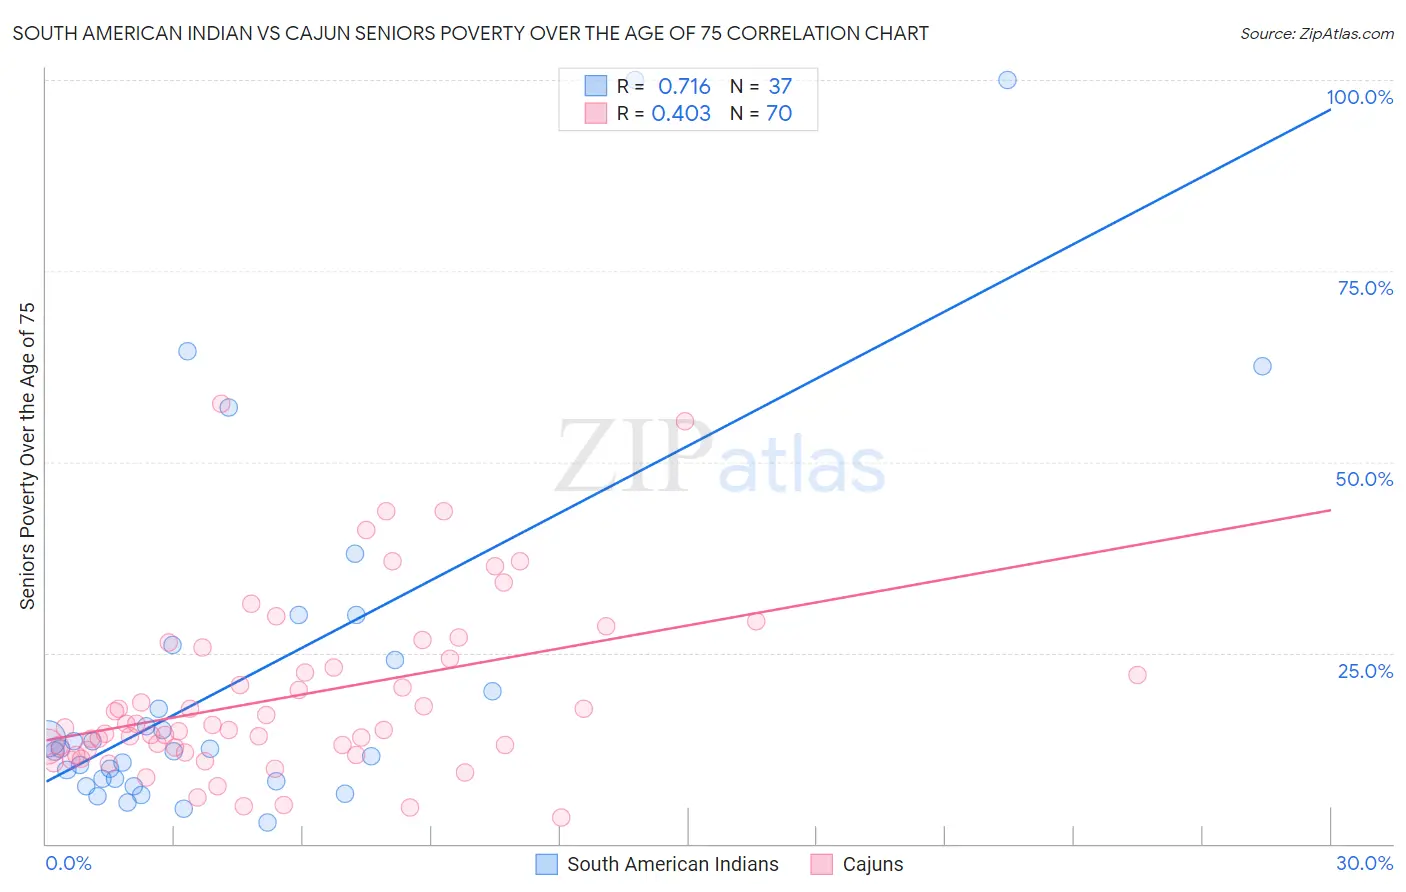 South American Indian vs Cajun Seniors Poverty Over the Age of 75